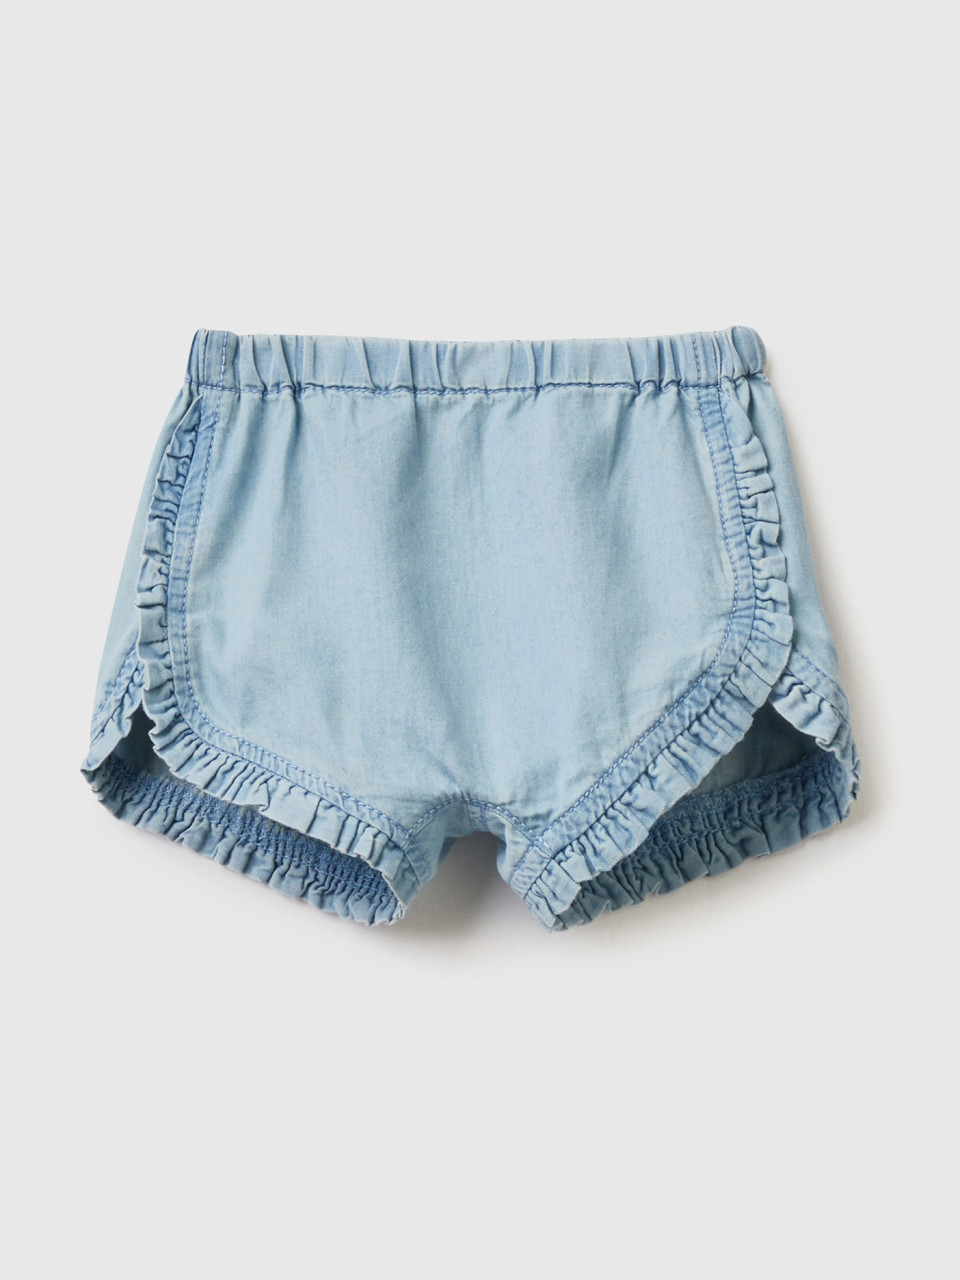 Benetton, Shorts With Rouches, Sky Blue, Kids